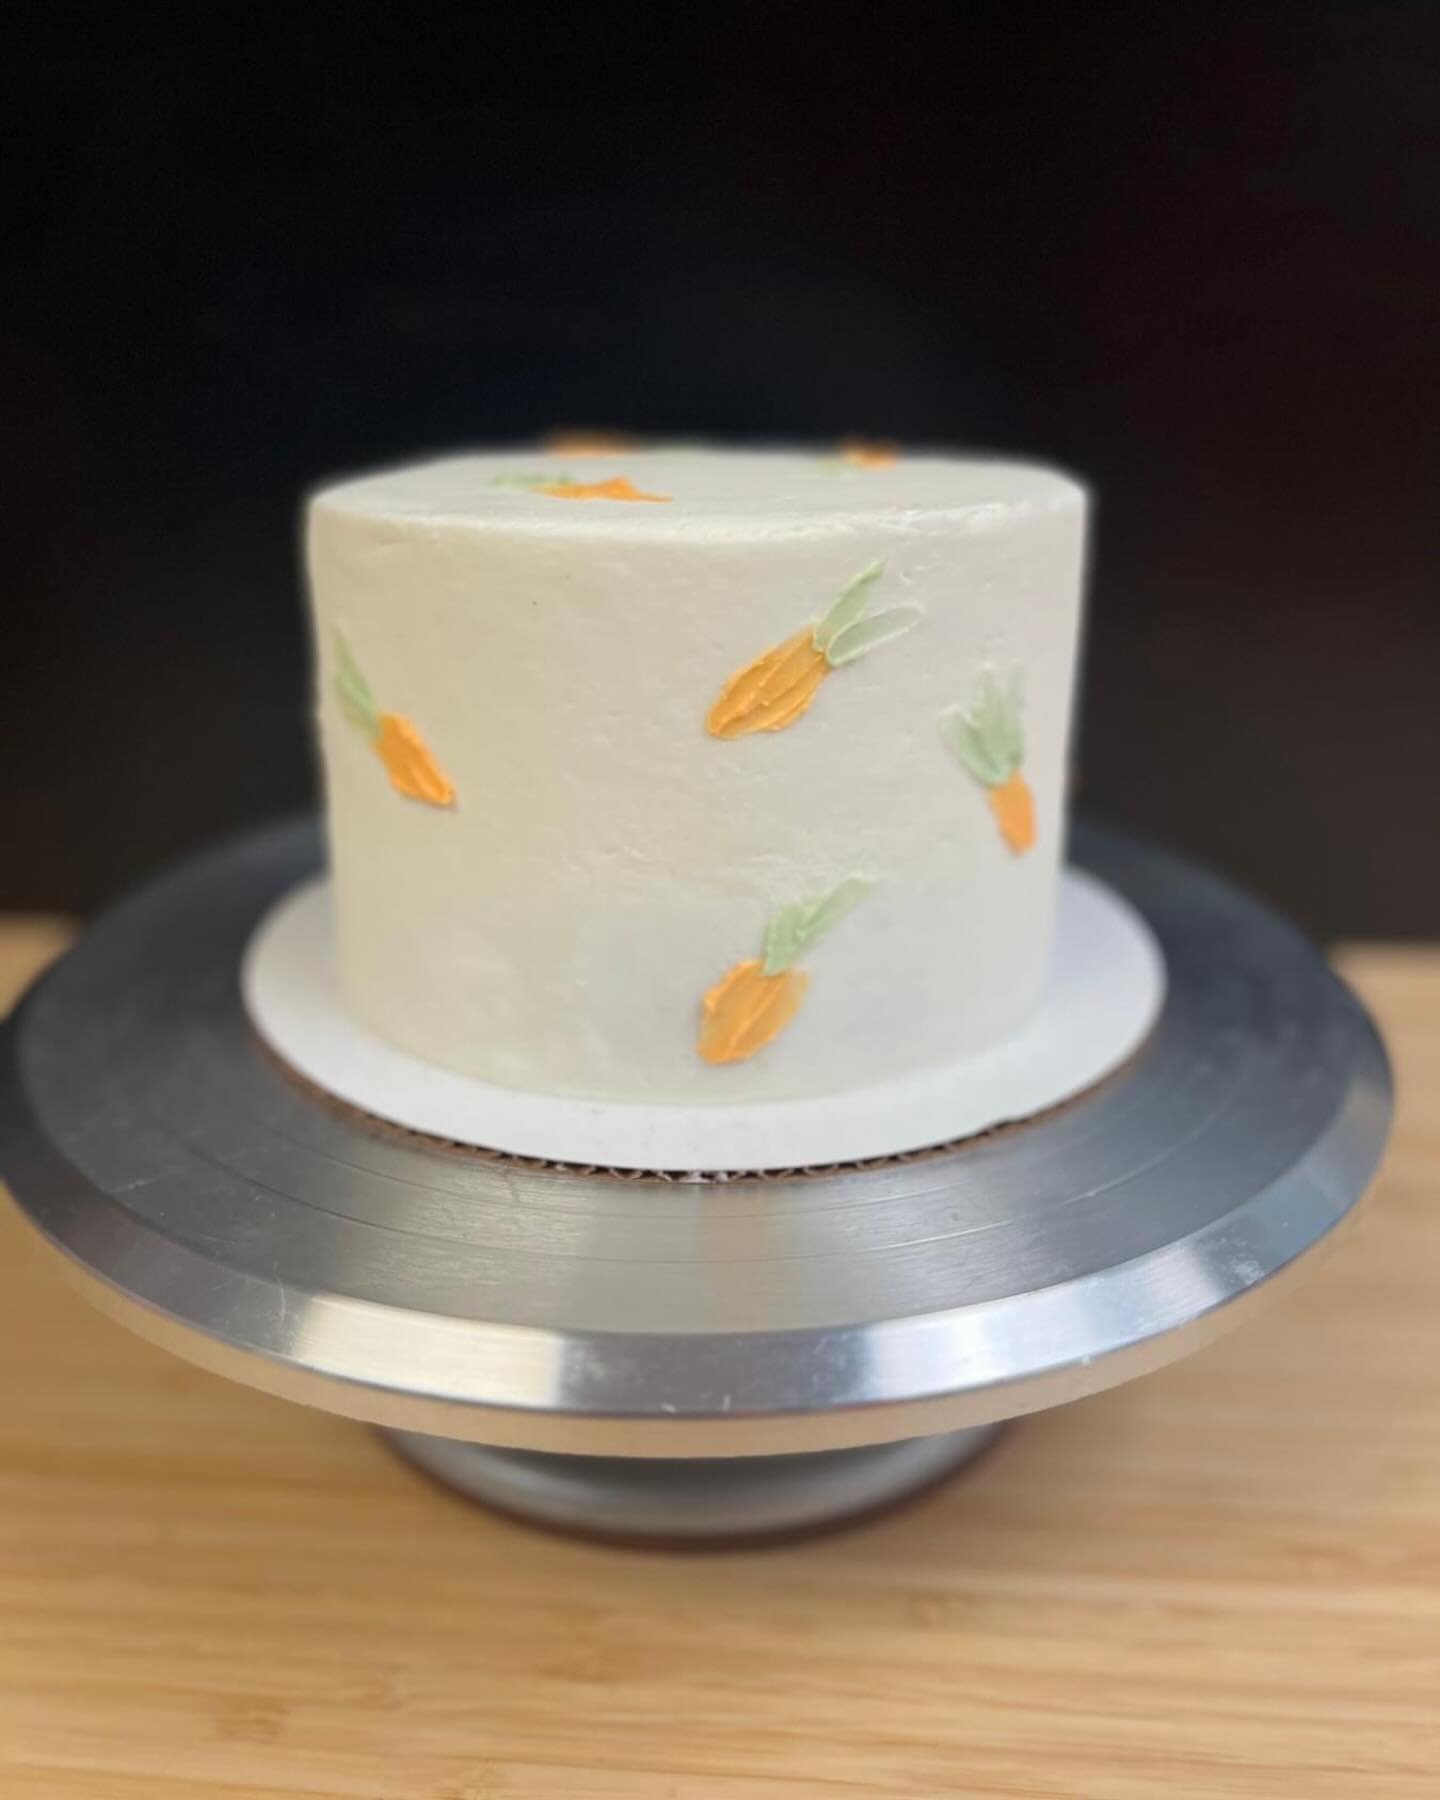 Look at this cutie little &ldquo;carrot cake&rdquo; smash cake! While it wasn&rsquo;t carrot cake on the inside, we really thought this cake was pretty sweet 🥰

 #johnsonvillecakes #wacocakes #cakesofwacotexas #cakesofmcgregor #cakesofwaco #wacofirs